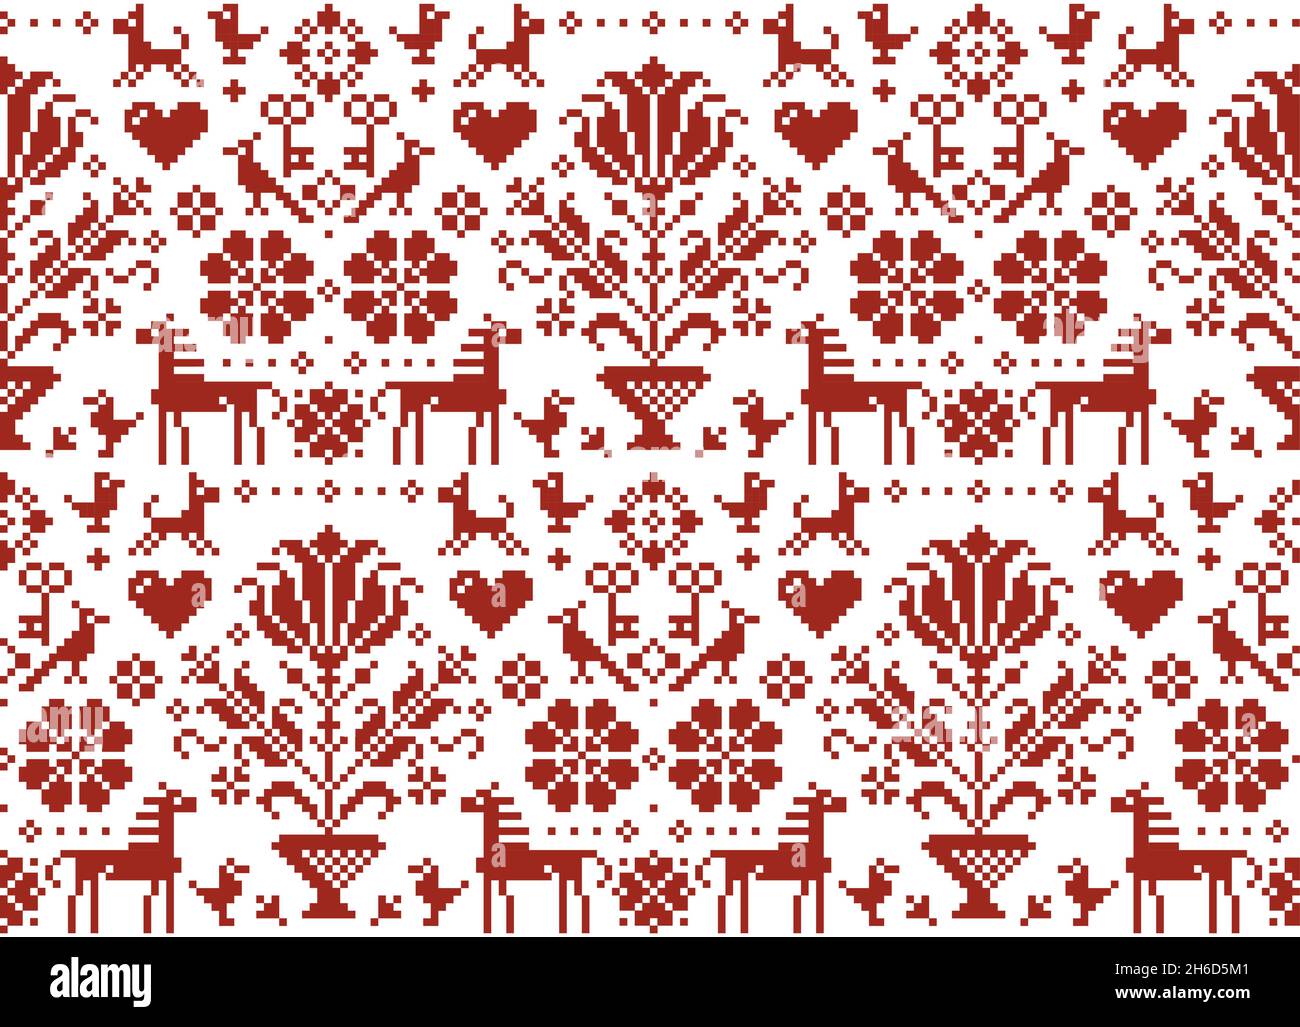 Traditional cross-stitch vector seamless folk art pattern with horses, flowers and birds - repetitive background inspired by German and Austrian ornam Stock Vector